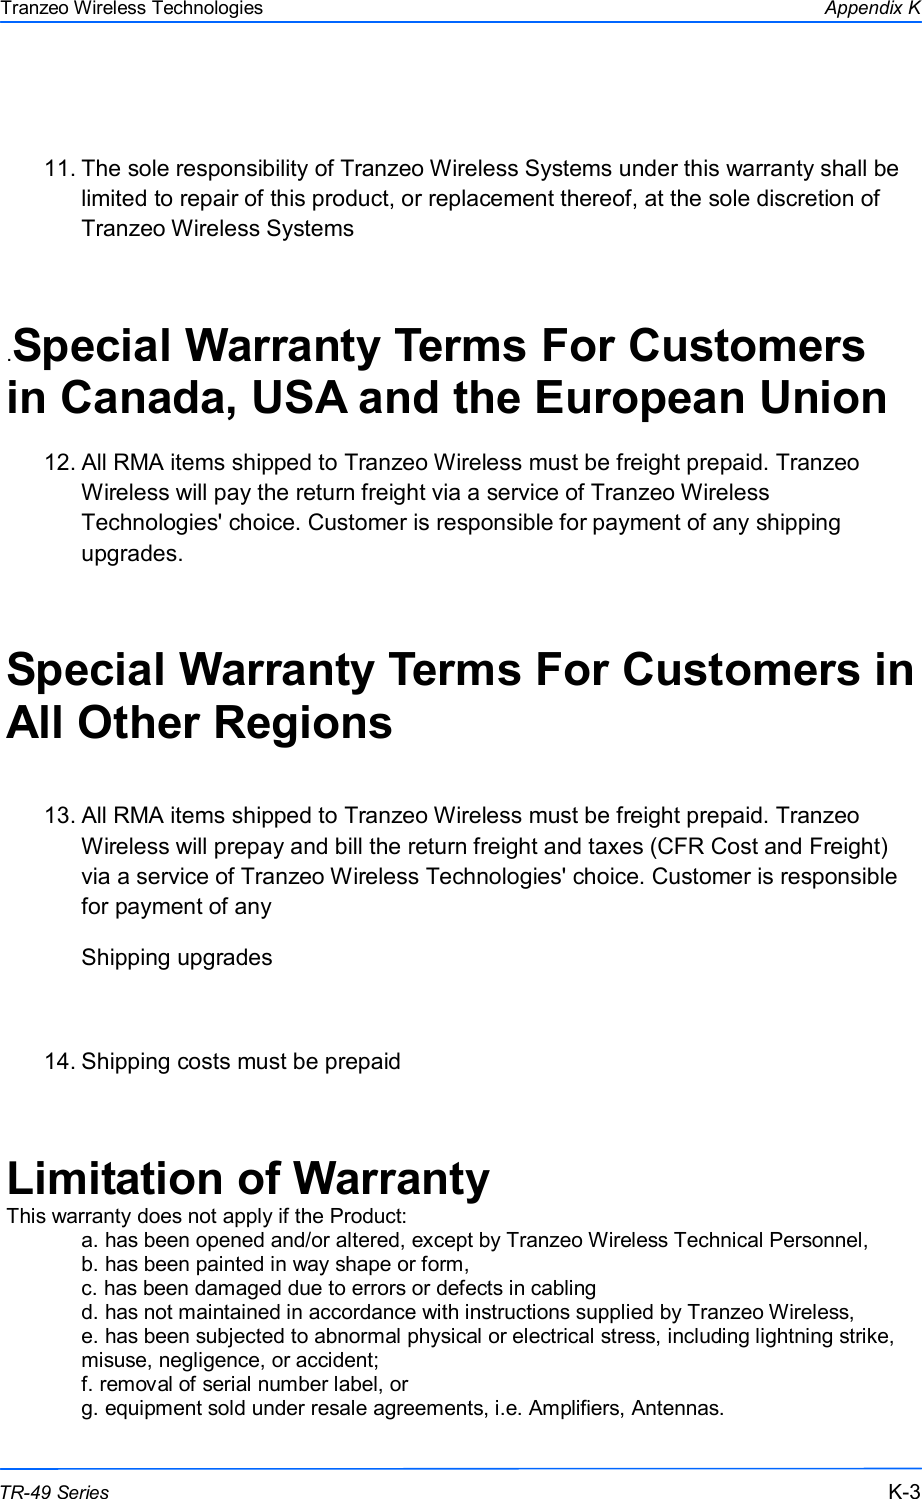  333 This document is intended for Public Distribution                         19473 Fraser Way, Pitt Meadows, B.C. Canada V3Y  2V4 Appendix K K-3 TR-49 Series Tranzeo Wireless Technologies  11. The sole responsibility of Tranzeo Wireless Systems under this warranty shall be limited to repair of this product, or replacement thereof, at the sole discretion of Tranzeo Wireless Systems  .Special Warranty Terms For Customers in Canada, USA and the European Union  12. All RMA items shipped to Tranzeo Wireless must be freight prepaid. Tranzeo Wireless will pay the return freight via a service of Tranzeo Wireless Technologies&apos; choice. Customer is responsible for payment of any shipping upgrades.  Special Warranty Terms For Customers in All Other Regions  13. All RMA items shipped to Tranzeo Wireless must be freight prepaid. Tranzeo Wireless will prepay and bill the return freight and taxes (CFR Cost and Freight) via a service of Tranzeo Wireless Technologies&apos; choice. Customer is responsible for payment of any  Shipping upgrades  14. Shipping costs must be prepaid  Limitation of Warranty This warranty does not apply if the Product: a. has been opened and/or altered, except by Tranzeo Wireless Technical Personnel, b. has been painted in way shape or form, c. has been damaged due to errors or defects in cabling d. has not maintained in accordance with instructions supplied by Tranzeo Wireless, e. has been subjected to abnormal physical or electrical stress, including lightning strike, misuse, negligence, or accident; f. removal of serial number label, or g. equipment sold under resale agreements, i.e. Amplifiers, Antennas. 